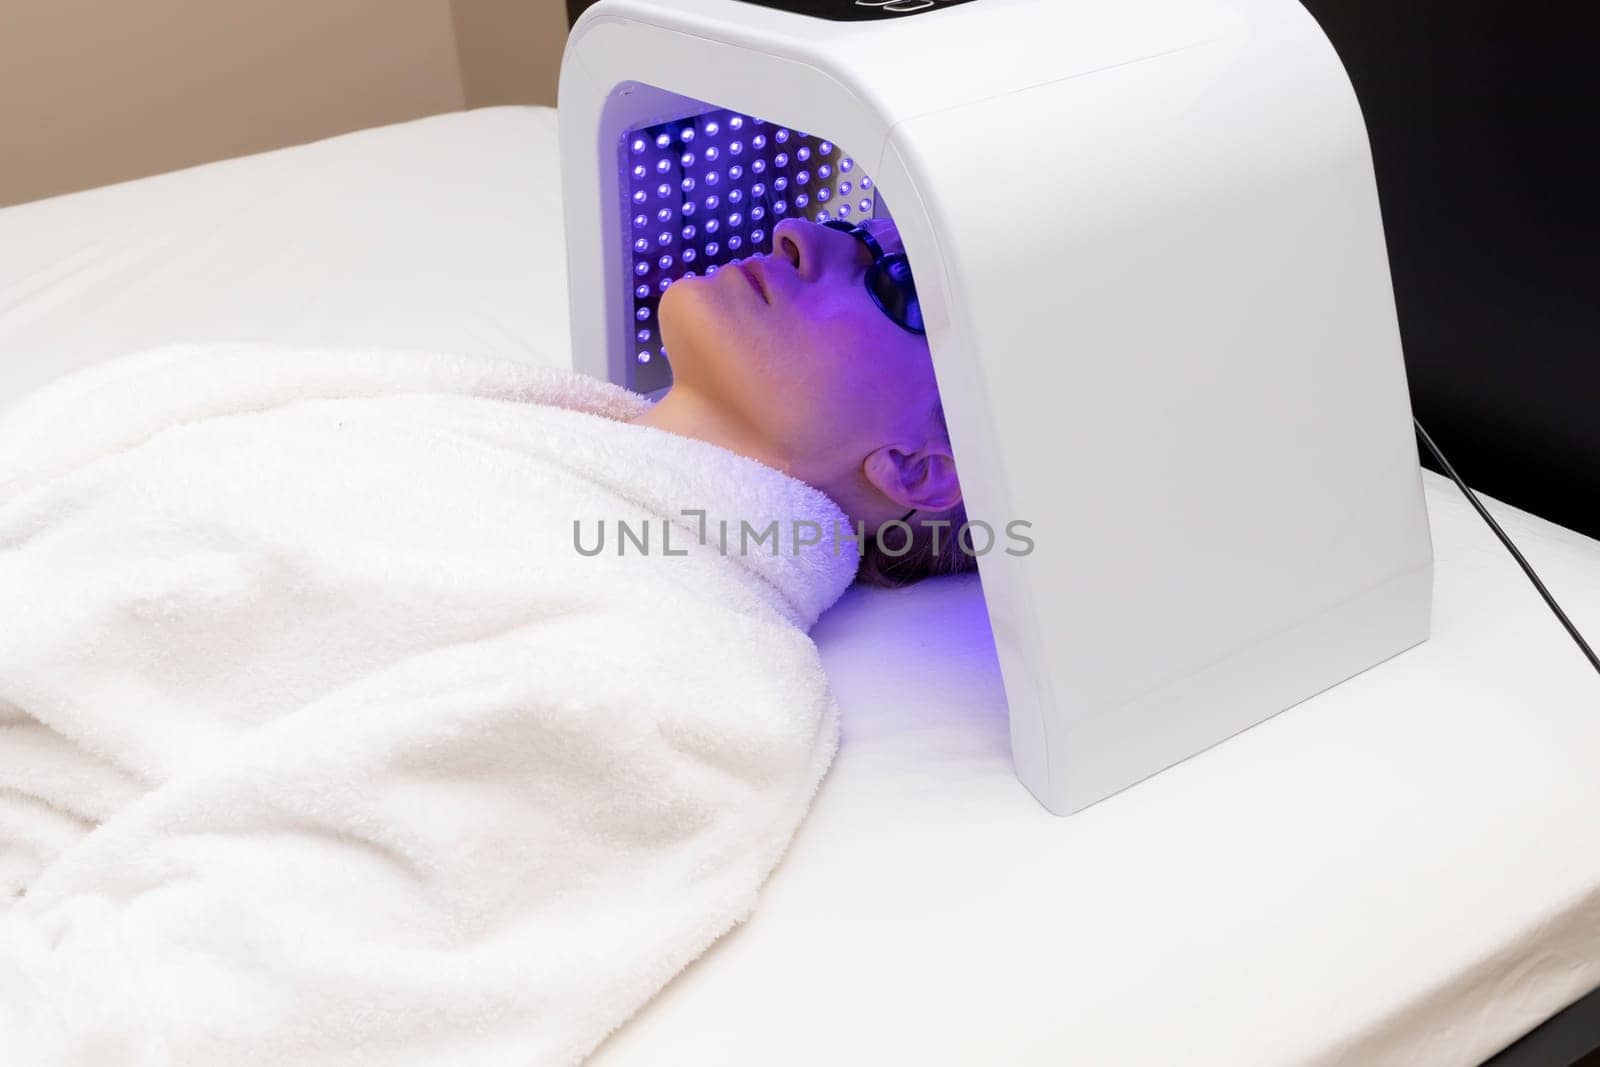 Home Skin Care Procedure. Cosmetic Led Light Face Mask. Woman In Her 30s Lying Under Facial Regenerative Treatment Mask On Bed In Bedroom. Acne, Spot Cure. Beauty Photon Therapy. Horizontal Plane by netatsi